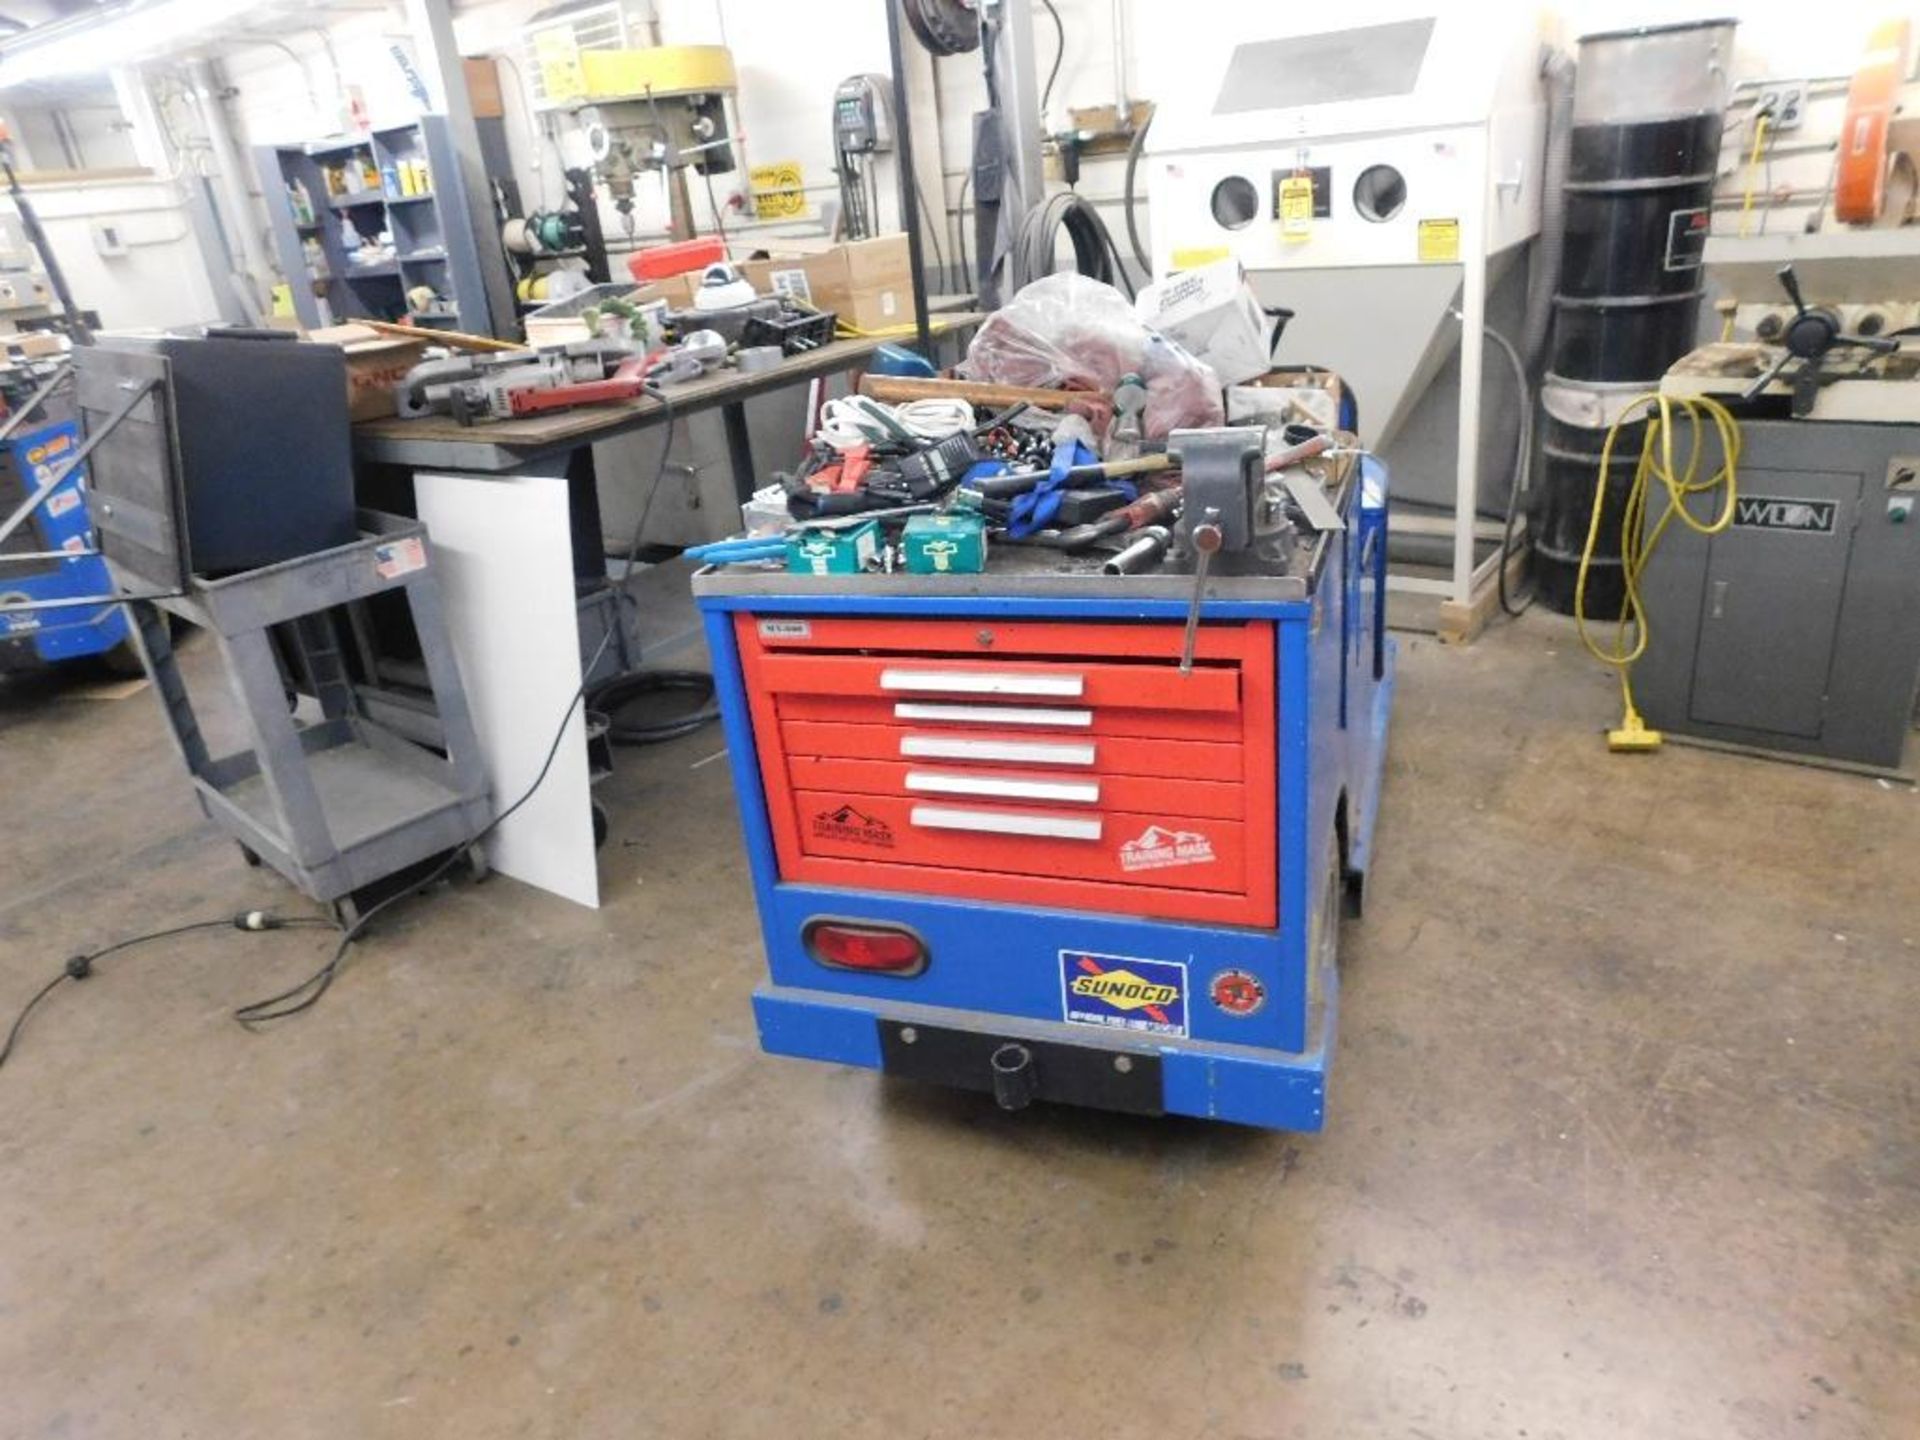 TAYLOR DUNN MX 600 ELECTRIC MAINTENANCE CART W/ 4 IN. WILTON BENCH VISE, 5-DRAWER KENNEDY TOOL BOX, - Image 2 of 3